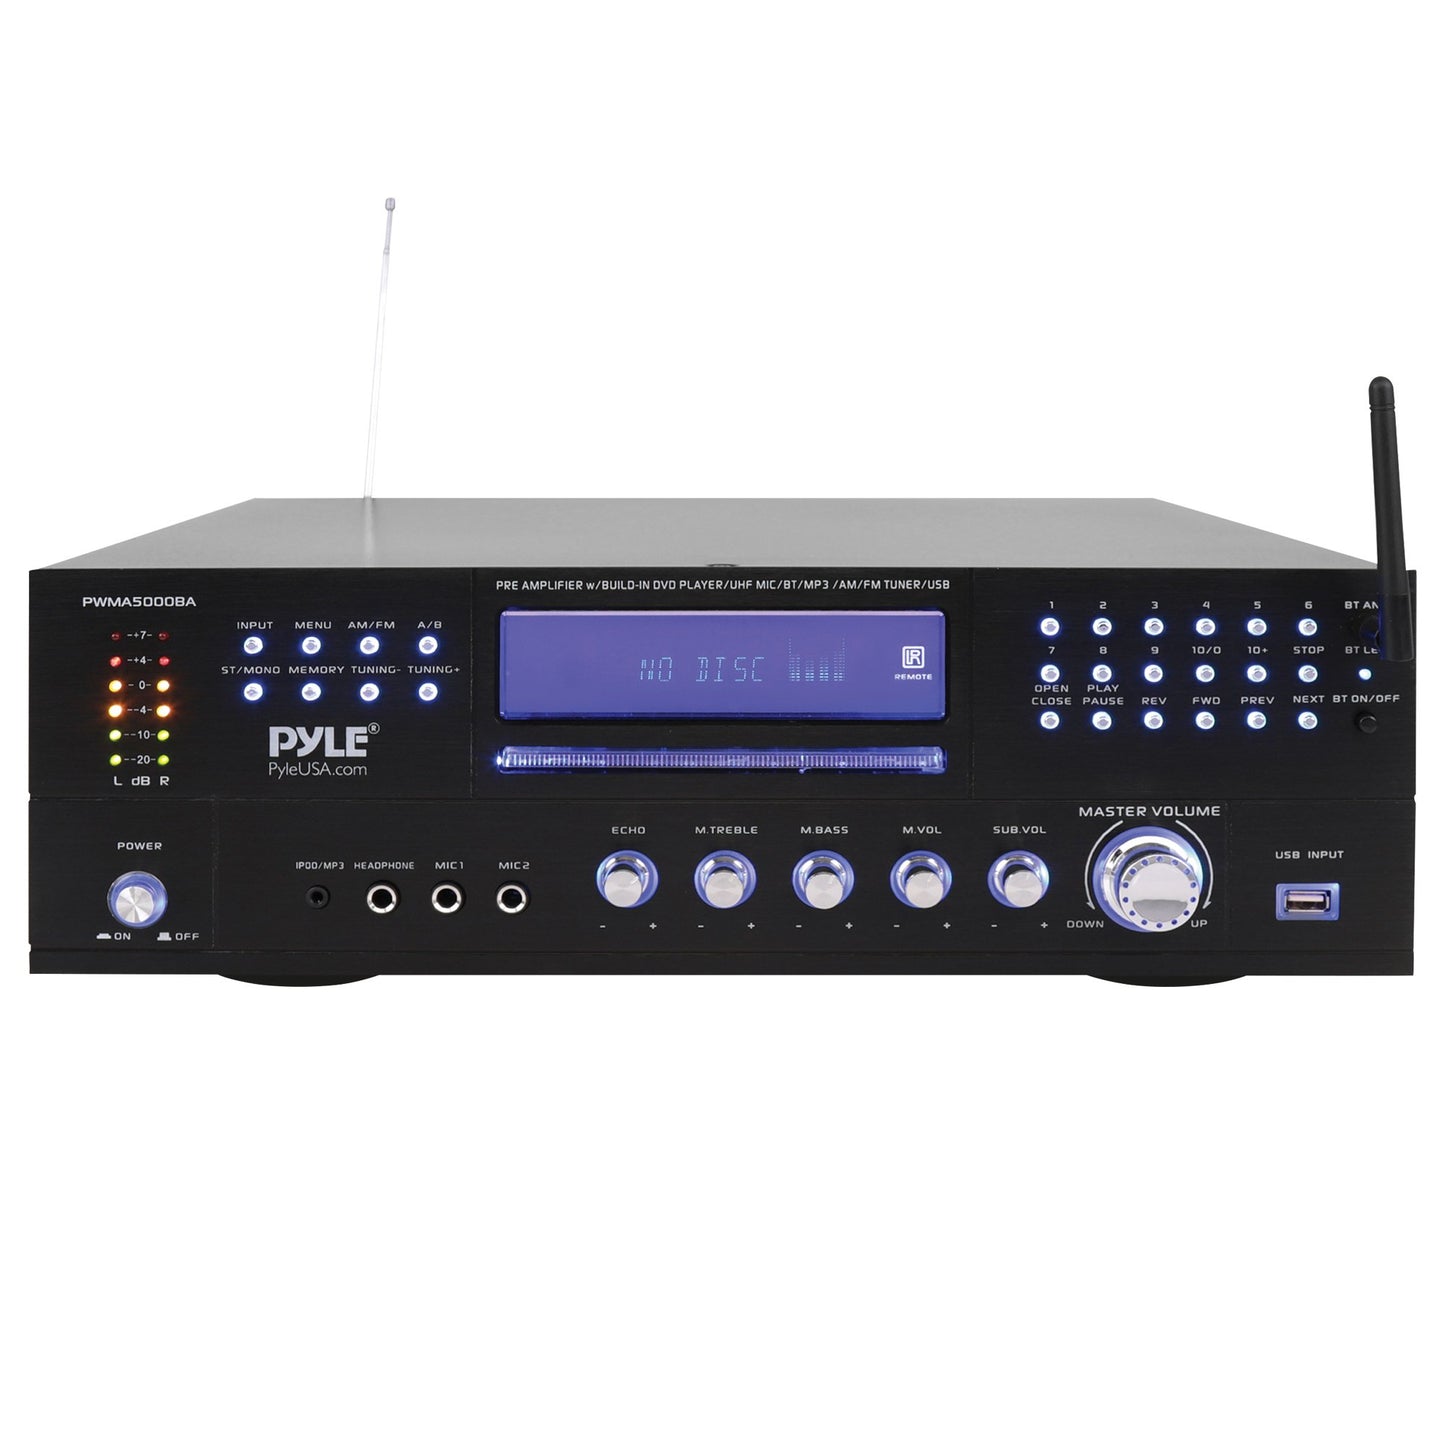 PYLE PWMA5000BA 4Ch 3000W Rack Home Theater Preamp Receiver w/BT & 2 UHF Mics